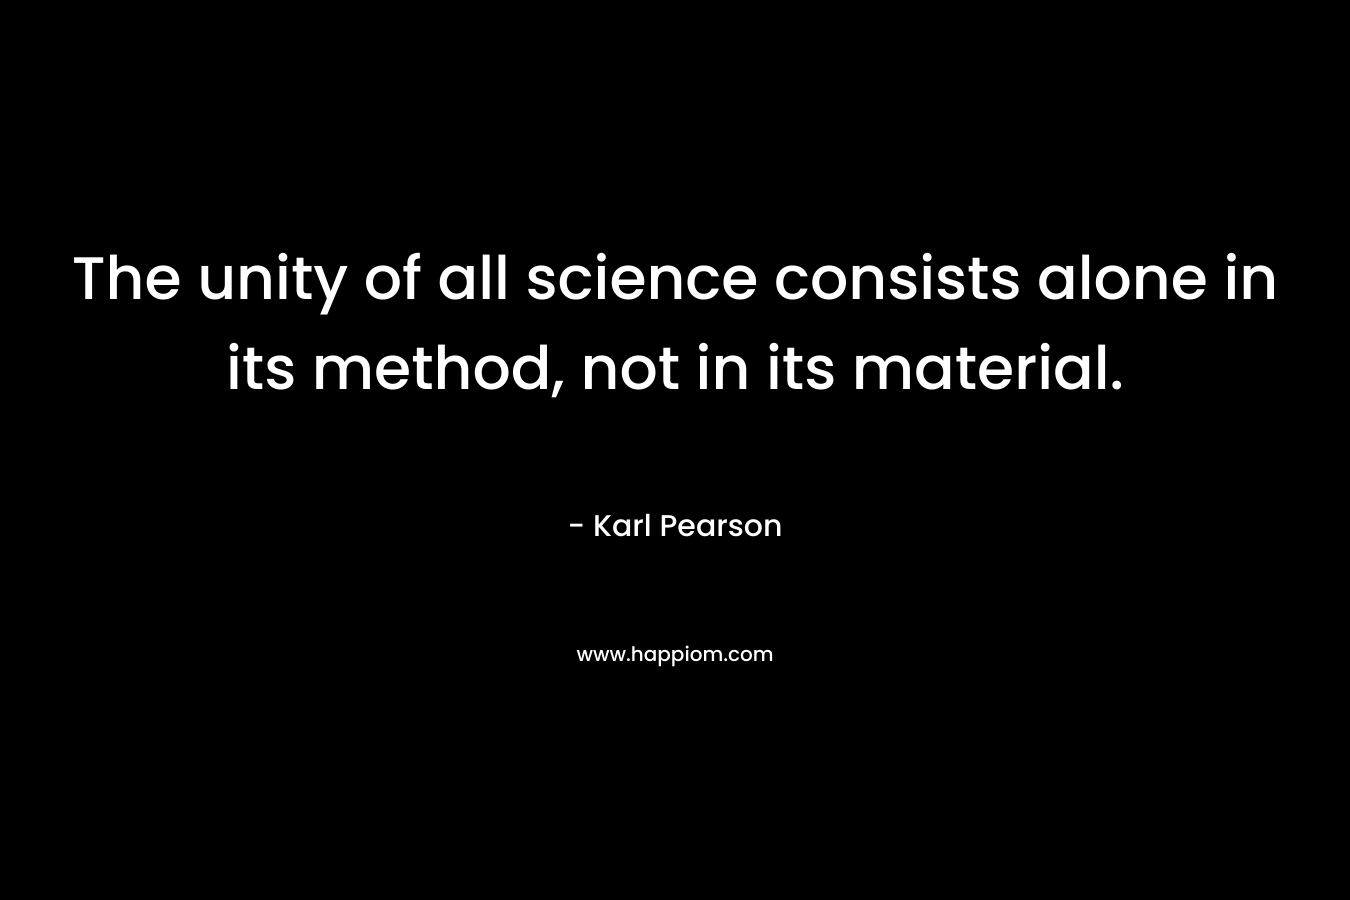 The unity of all science consists alone in its method, not in its material. – Karl Pearson